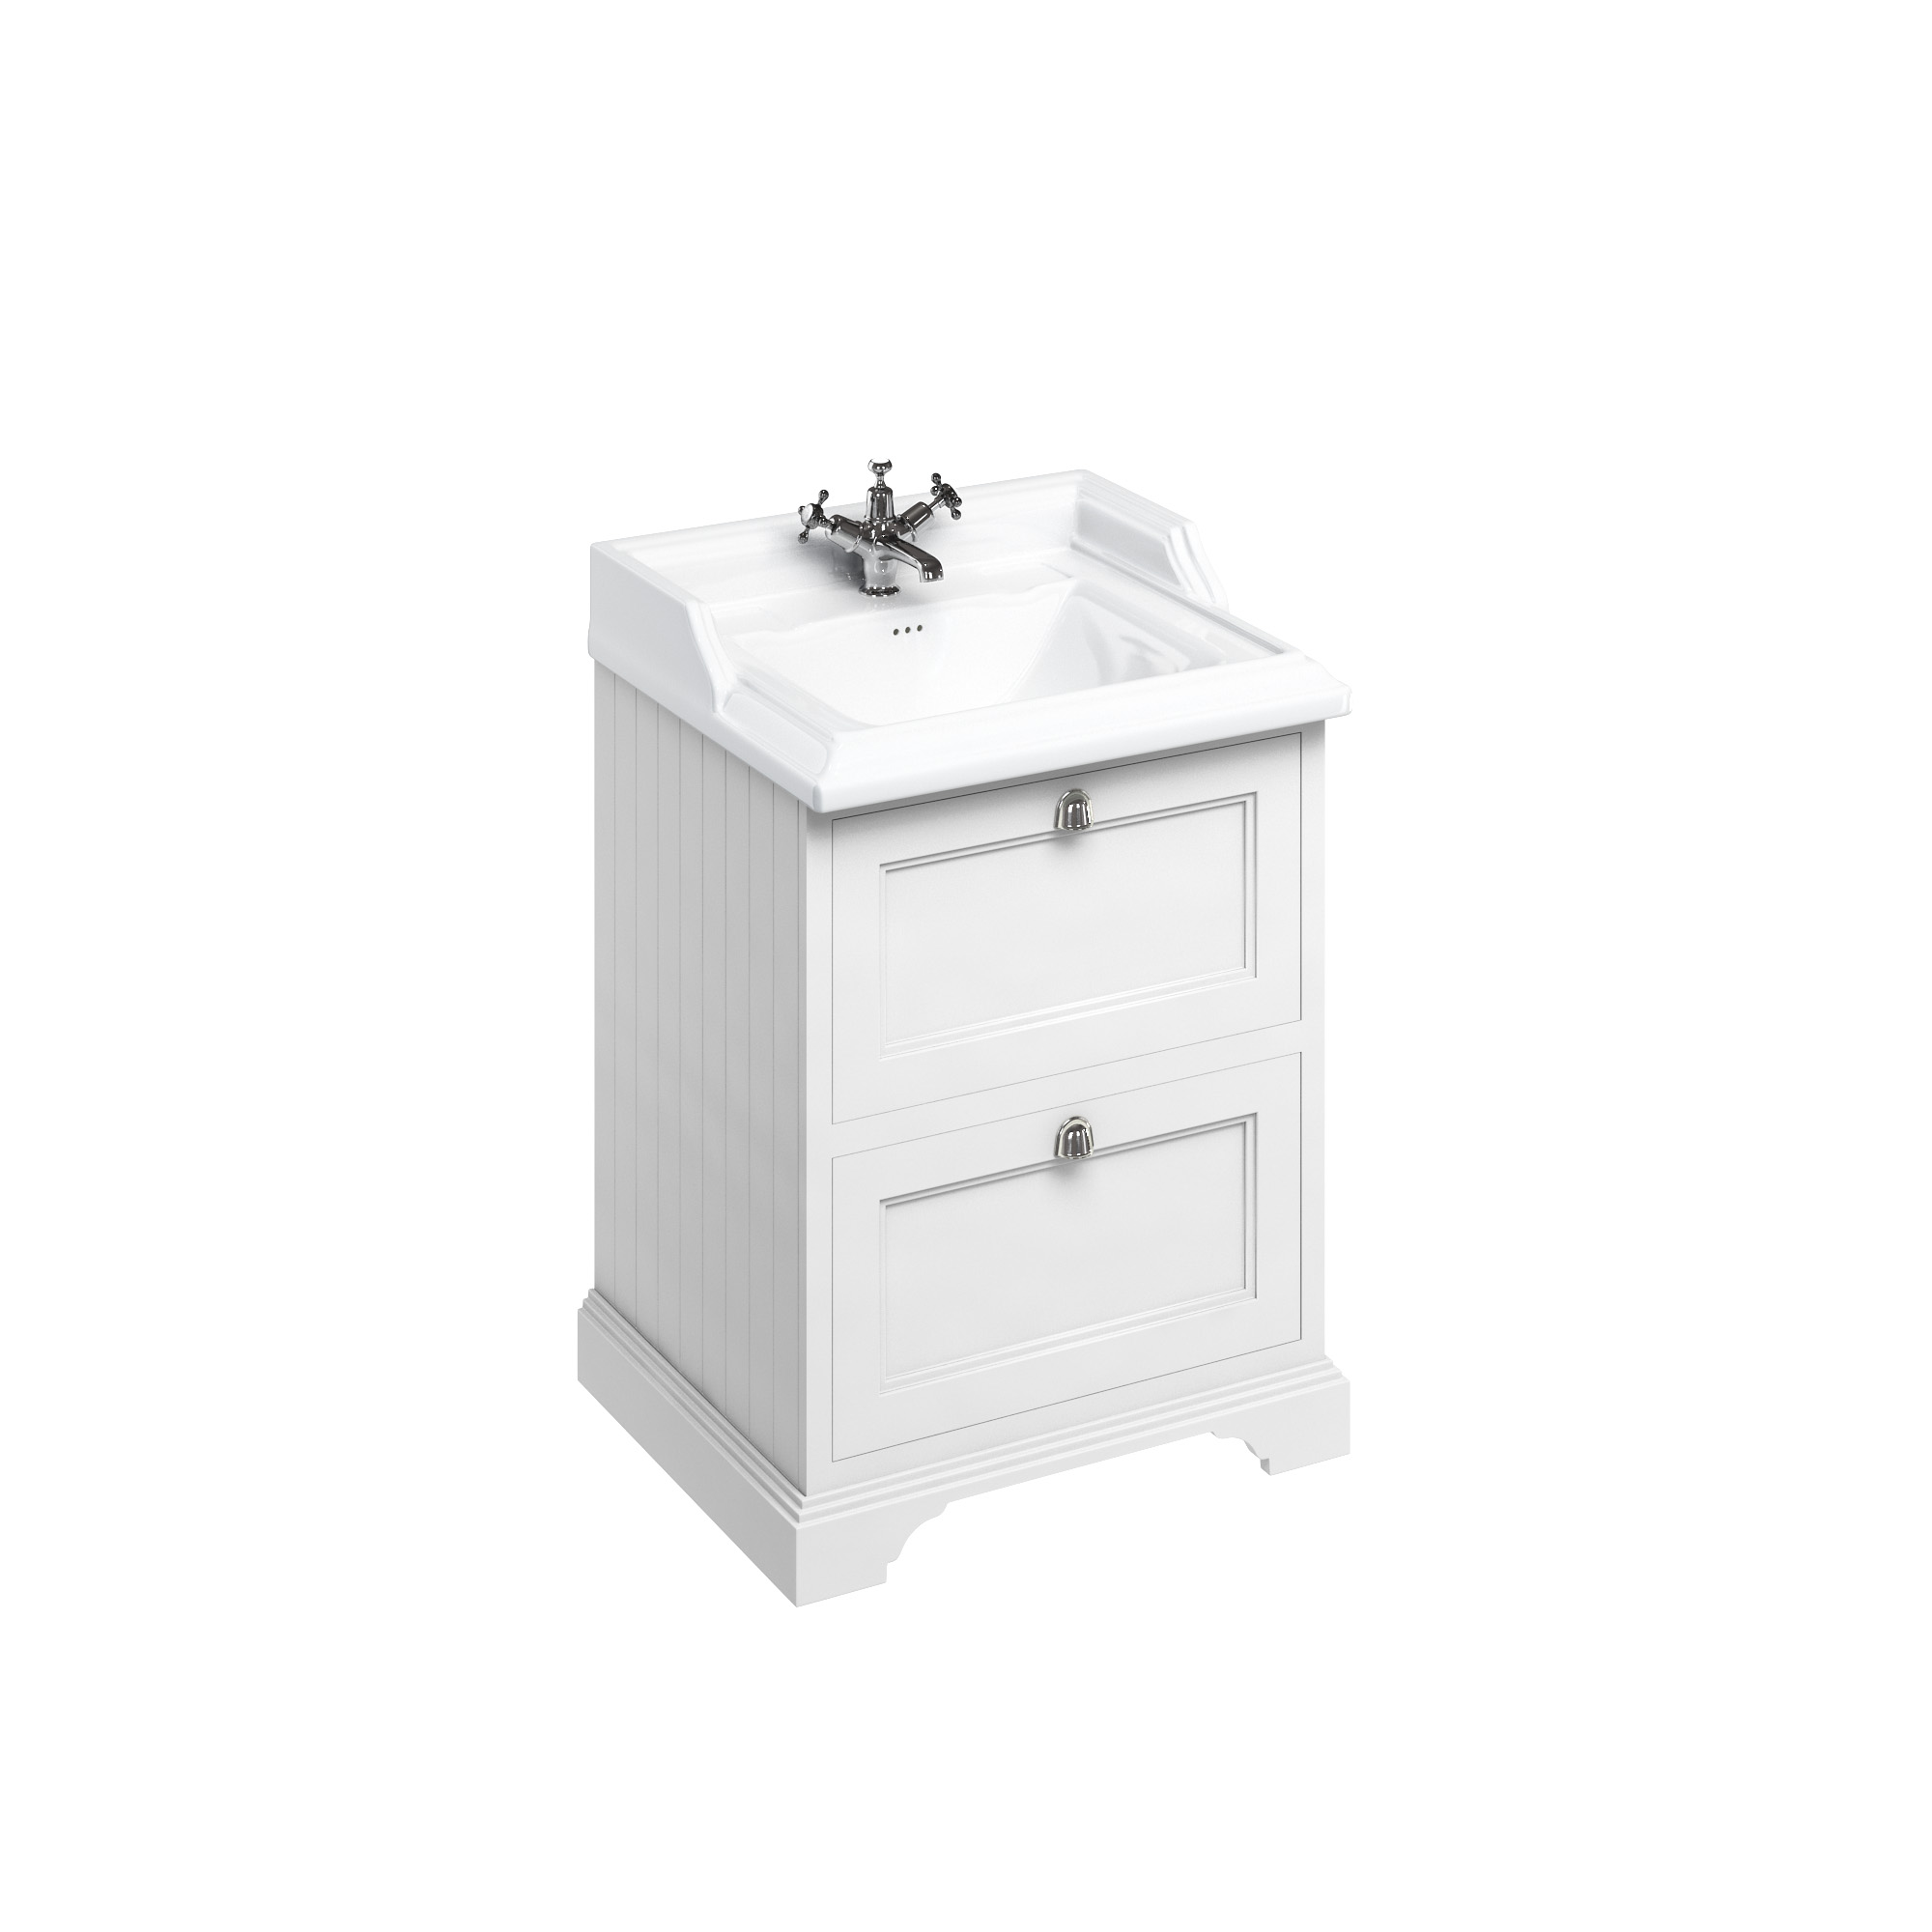 Freestanding 65 Vanity Unit with 2 drawers - Matt White and Classic basin 1 tap hole